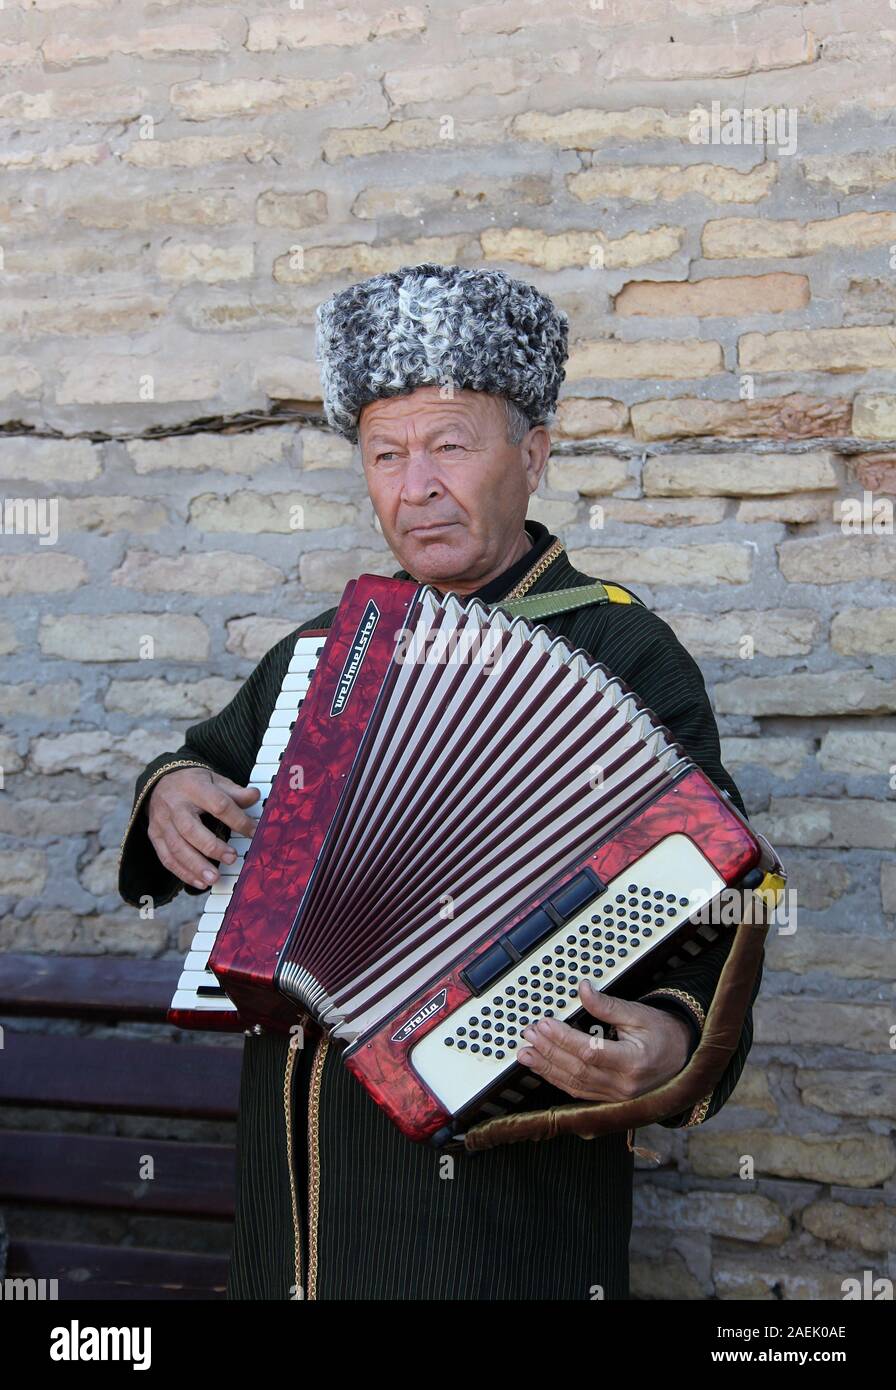 Street performer in Khiva playing the accordion Stock Photo